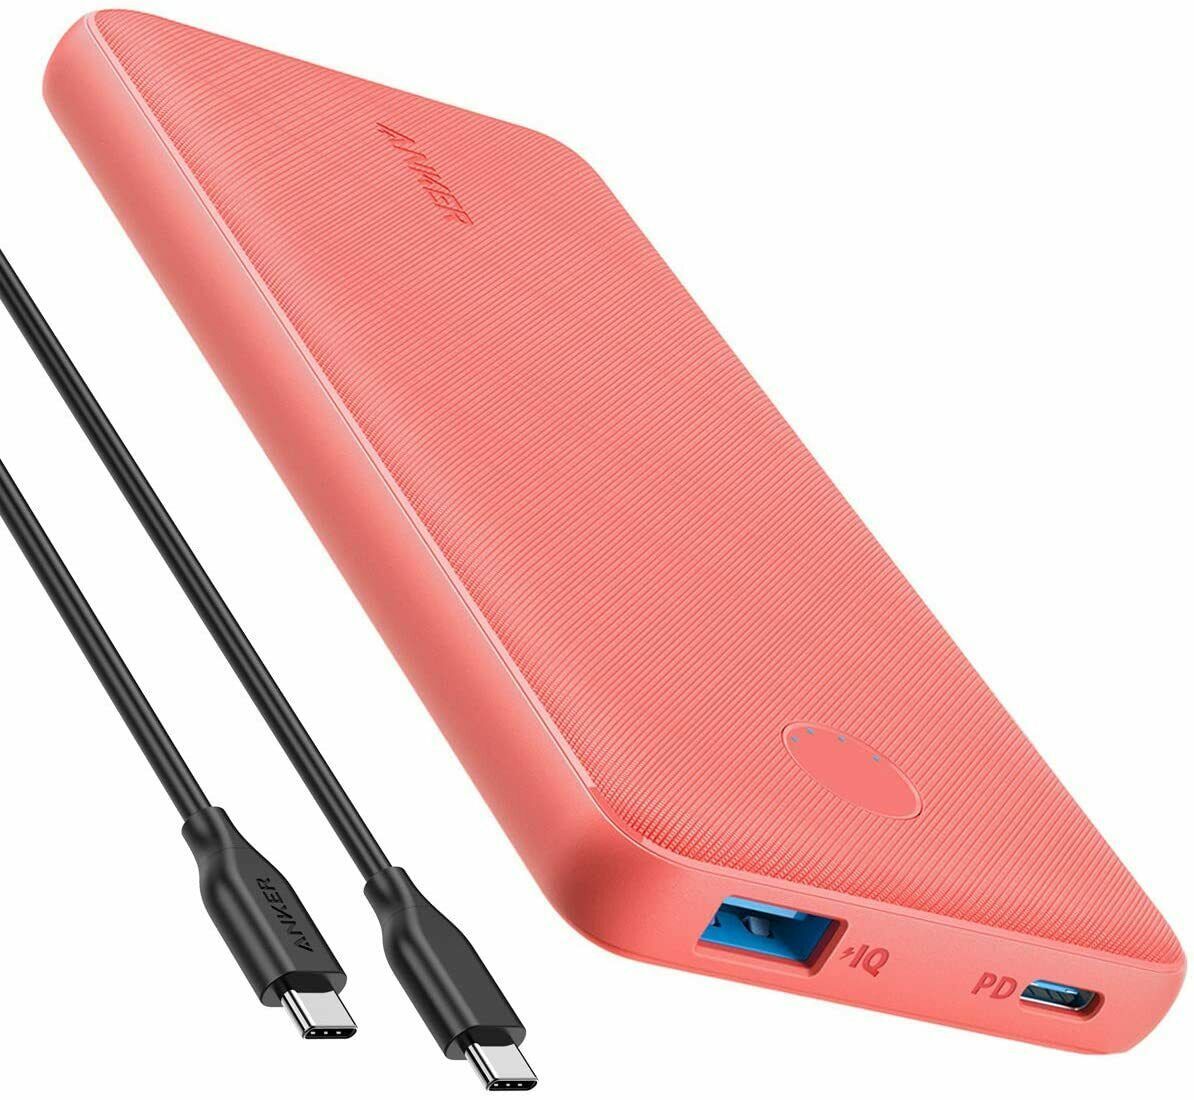 Anker PowerCore Slim 10000 PD 10000mAh Portable Charger USB-C Power Delivery 18W - $41.99 - $49.99